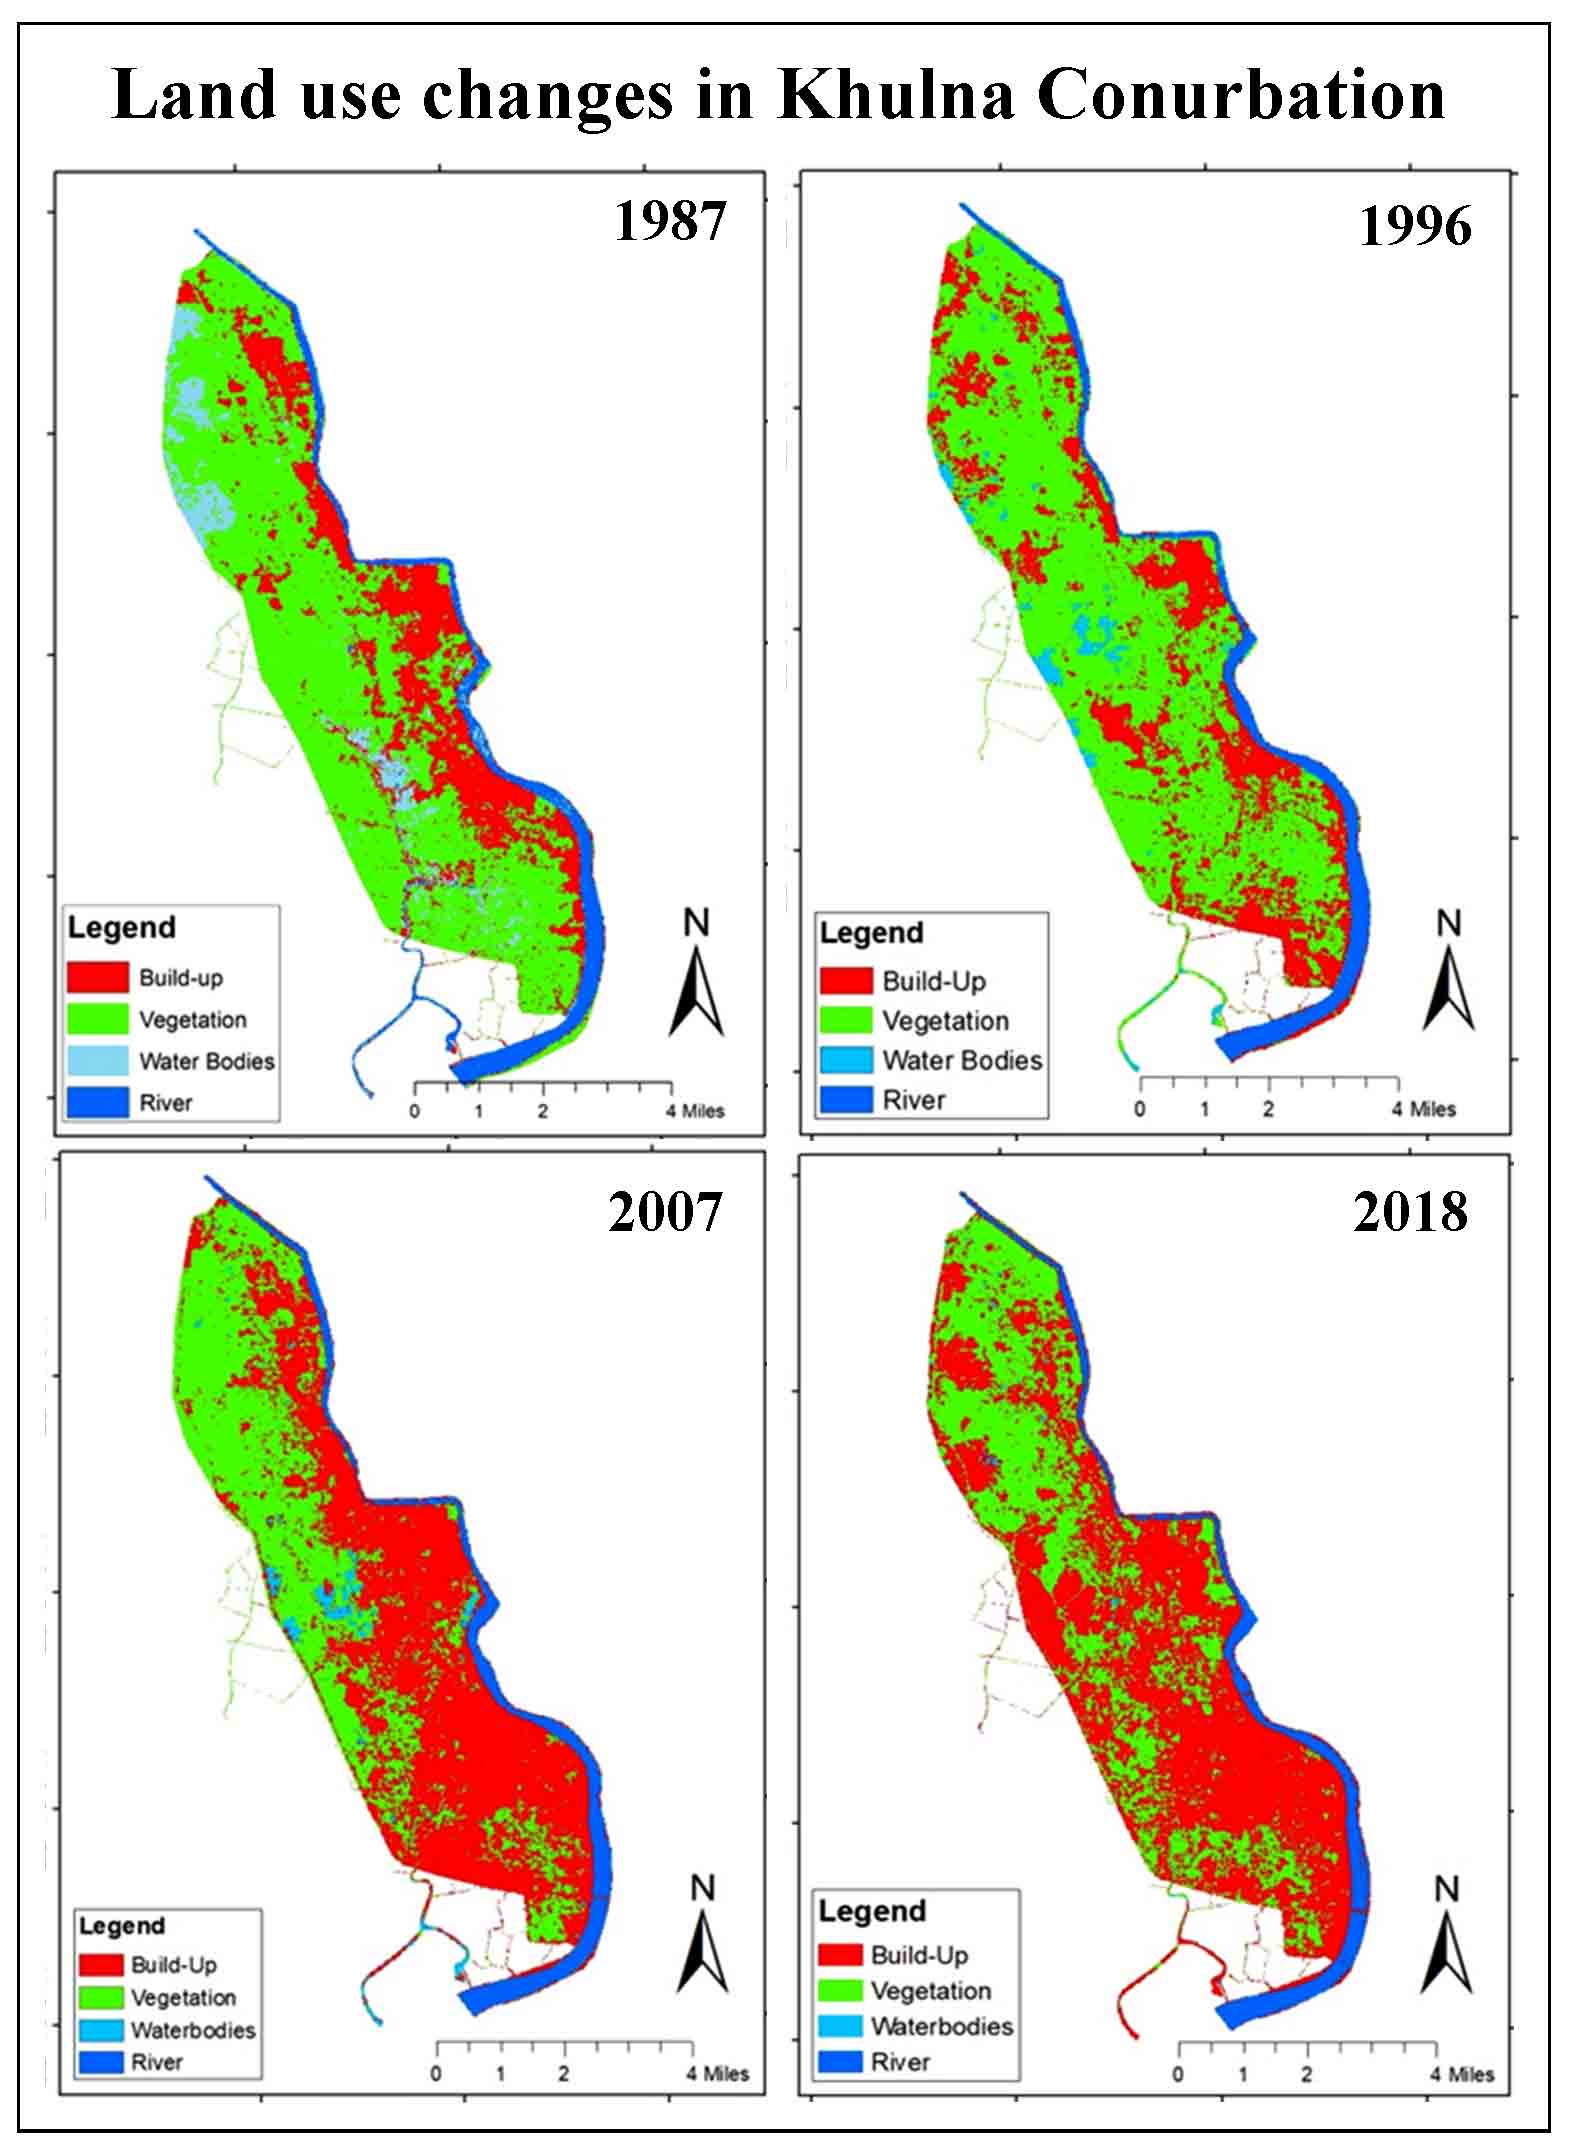 Assessing Land Use Change and Its Impact on Ecosystem Services in Khulna Conurbation